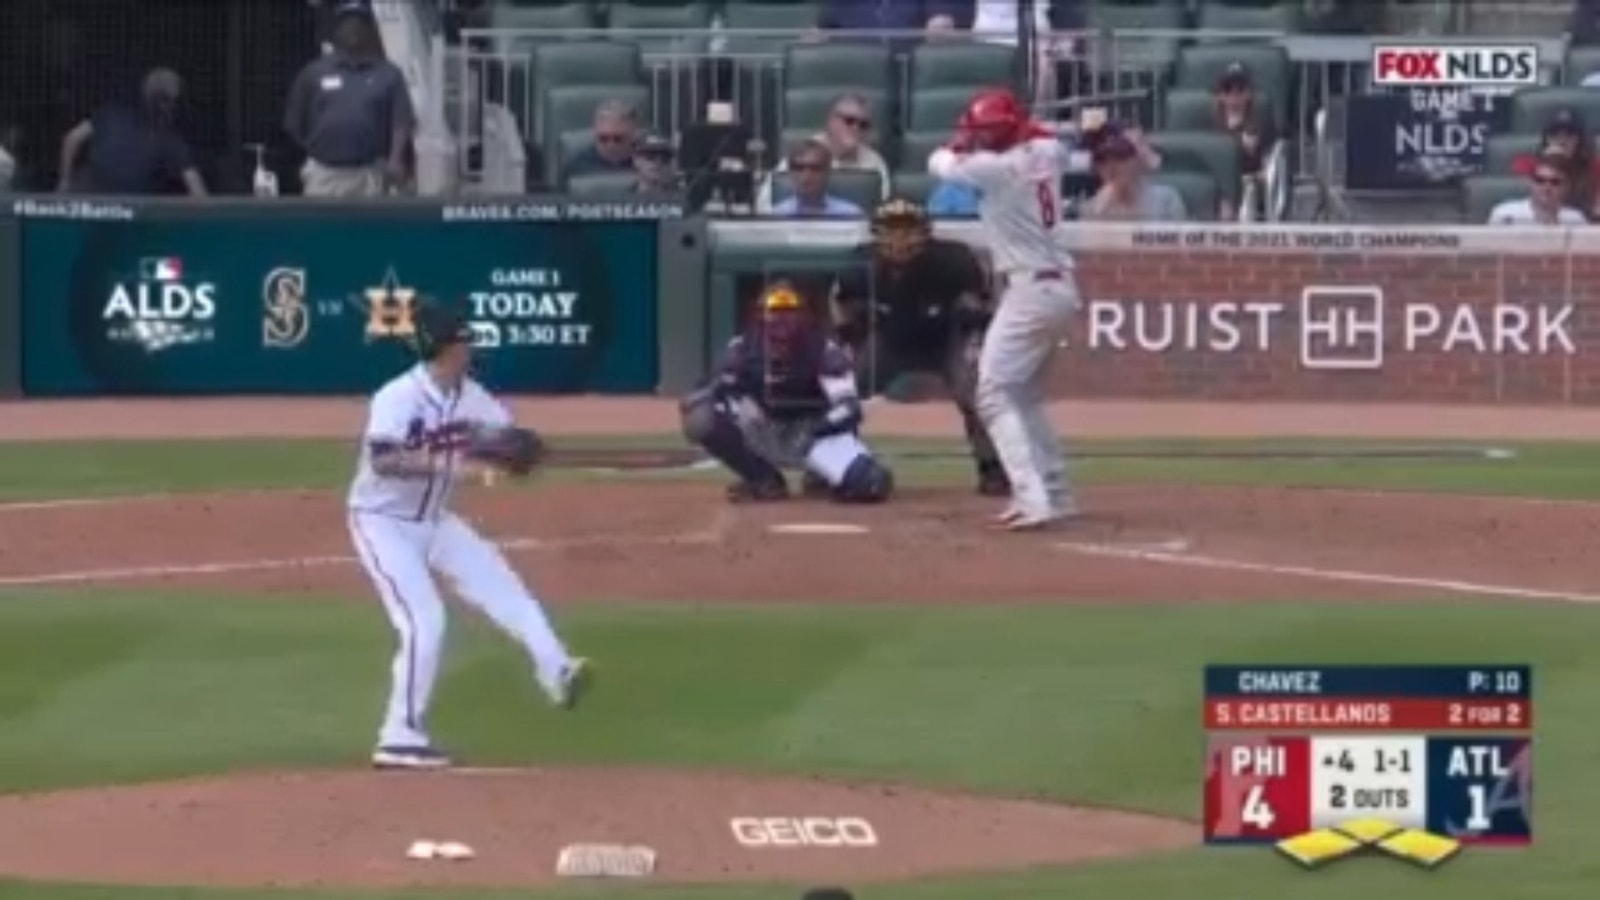 Nick Castellanos' two-run single gives the Phillies a 6-1 lead